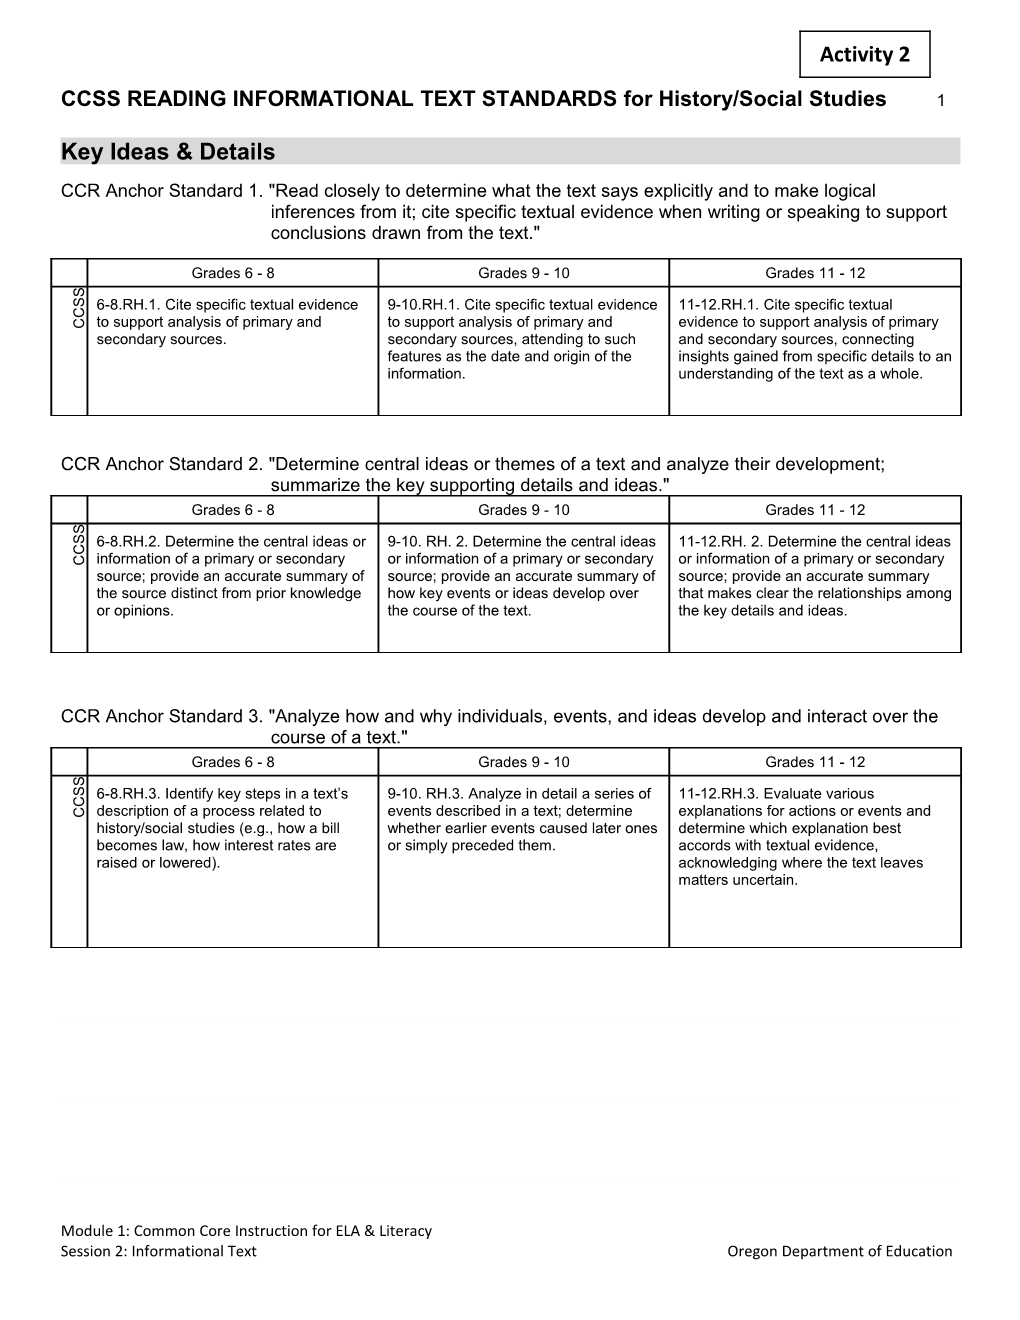 CCSS READING INFORMATIONAL TEXT STANDARDS for History/Social Studies 3